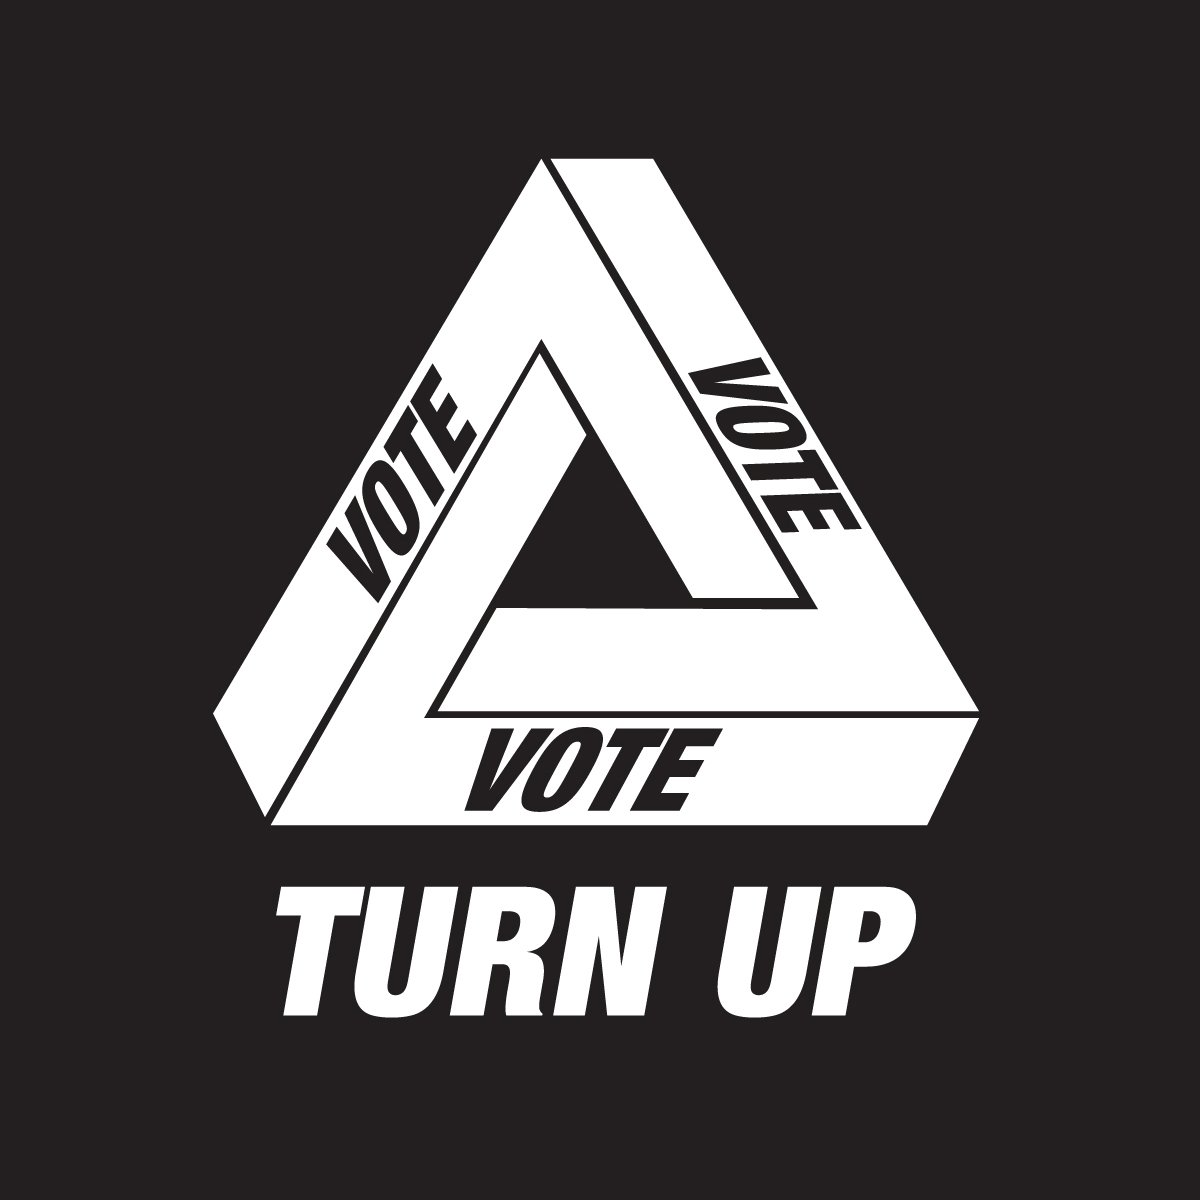 May 3rd is just around the corner. Get that crucial last-minute information on who and where to Vote this Thursday. Use @democlub 🗳️ WhereDoIVote.co.uk & 🗳️ WhoCanIVoteFor.co.uk Dont get caught short this May 3rd. #TurnUP and #TakePower